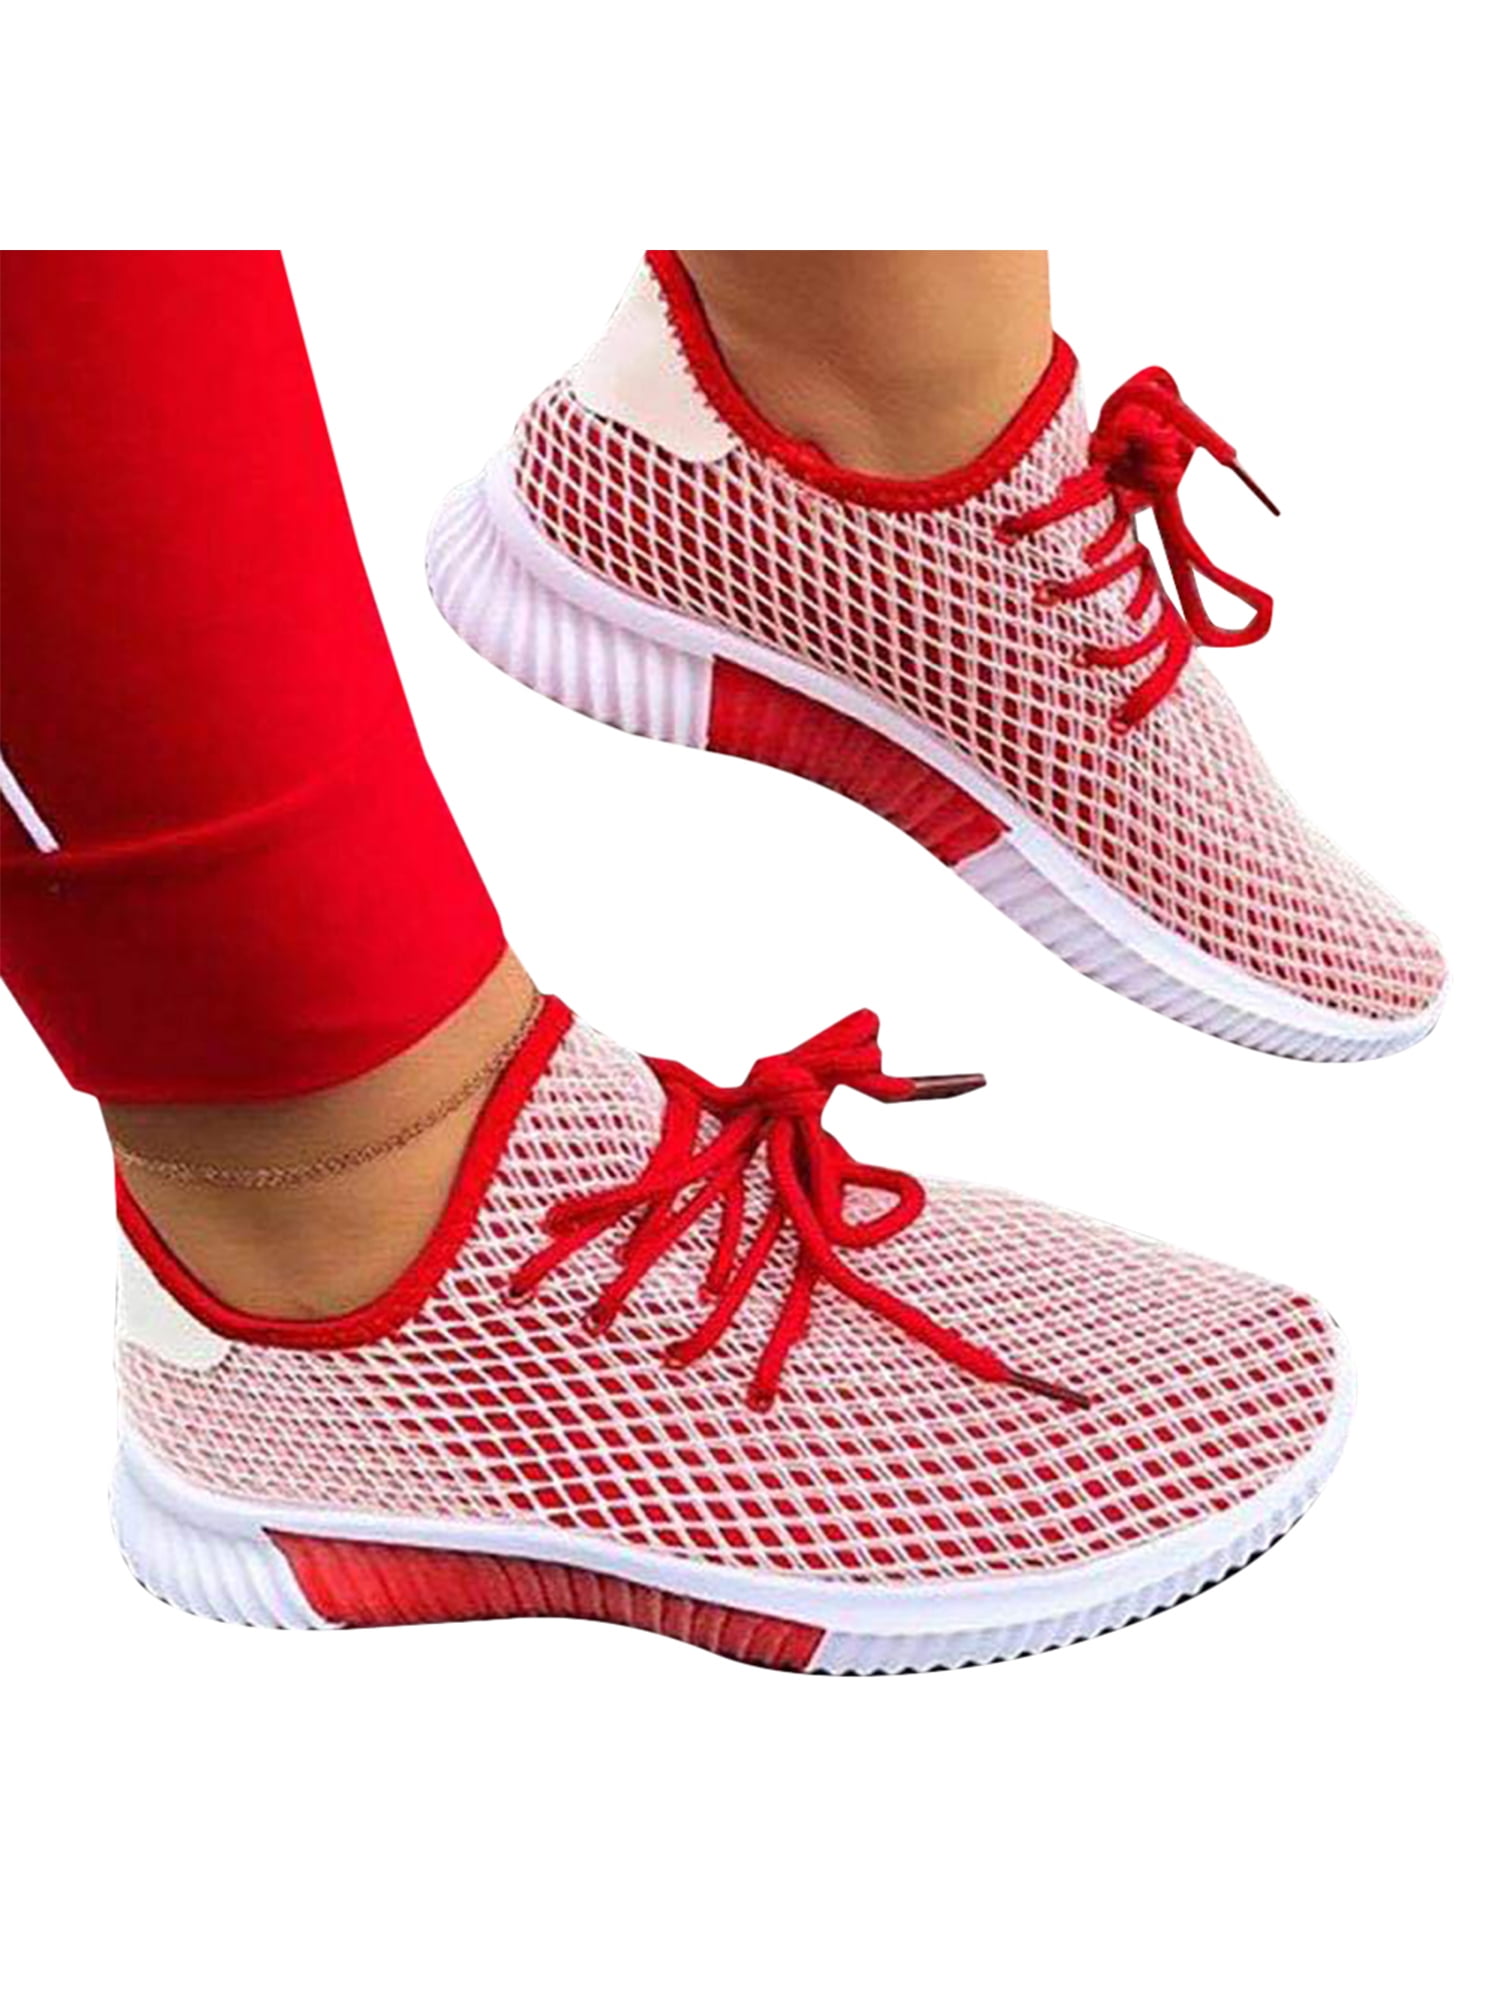 Geetobby New Women Casual Walking Running Sneakers Air Mesh Sports Lace-Up Shoes